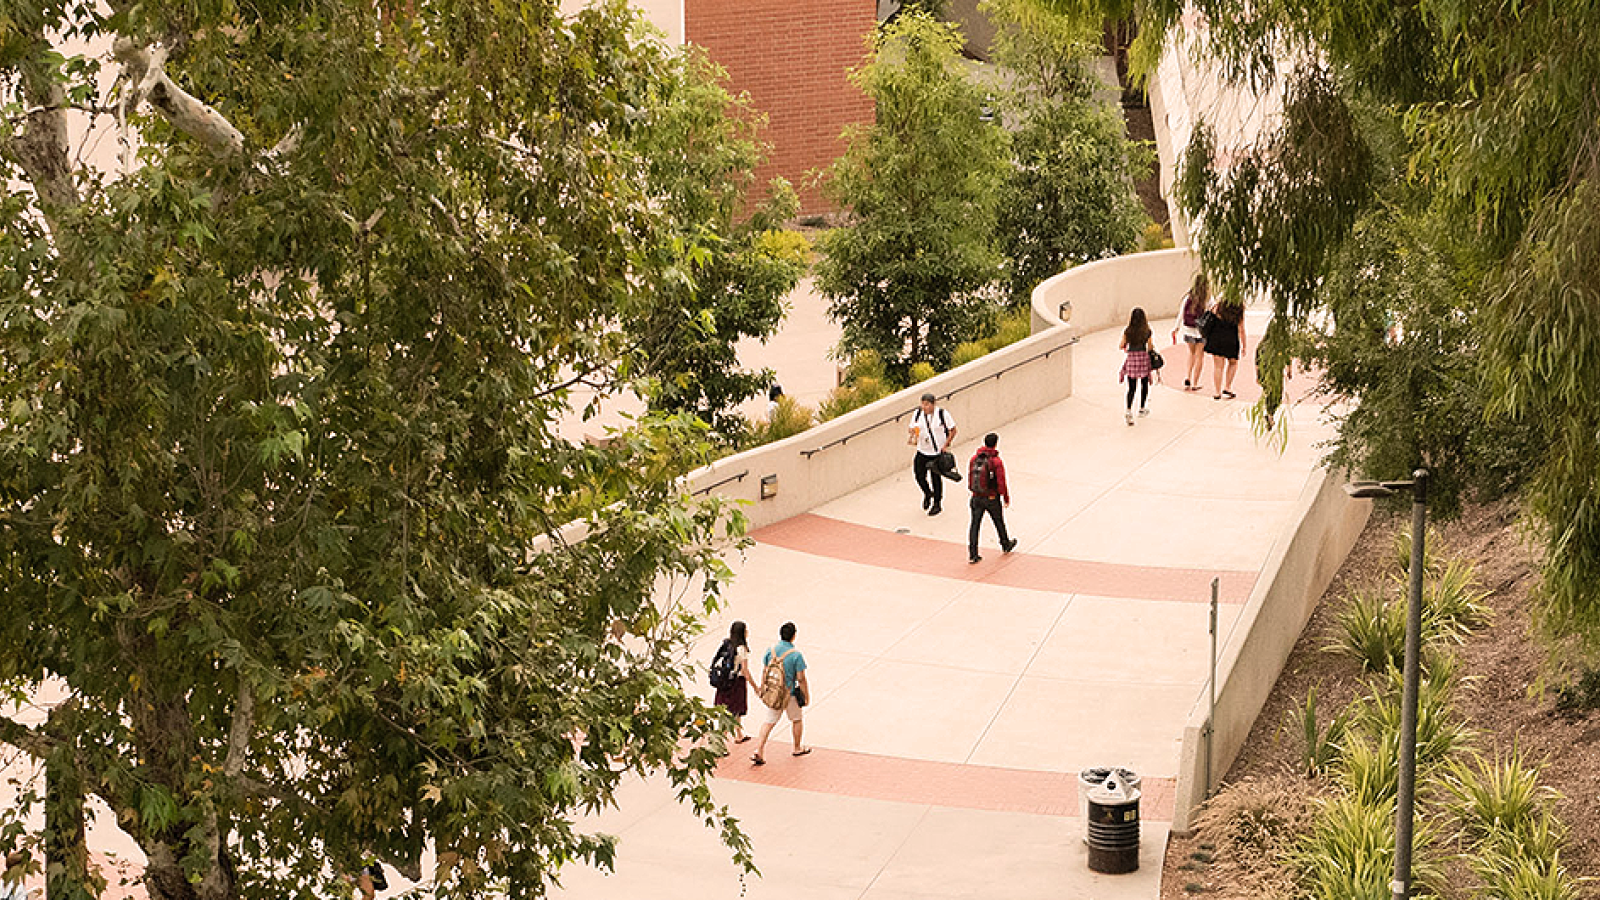 Overhead view of students walking on campus